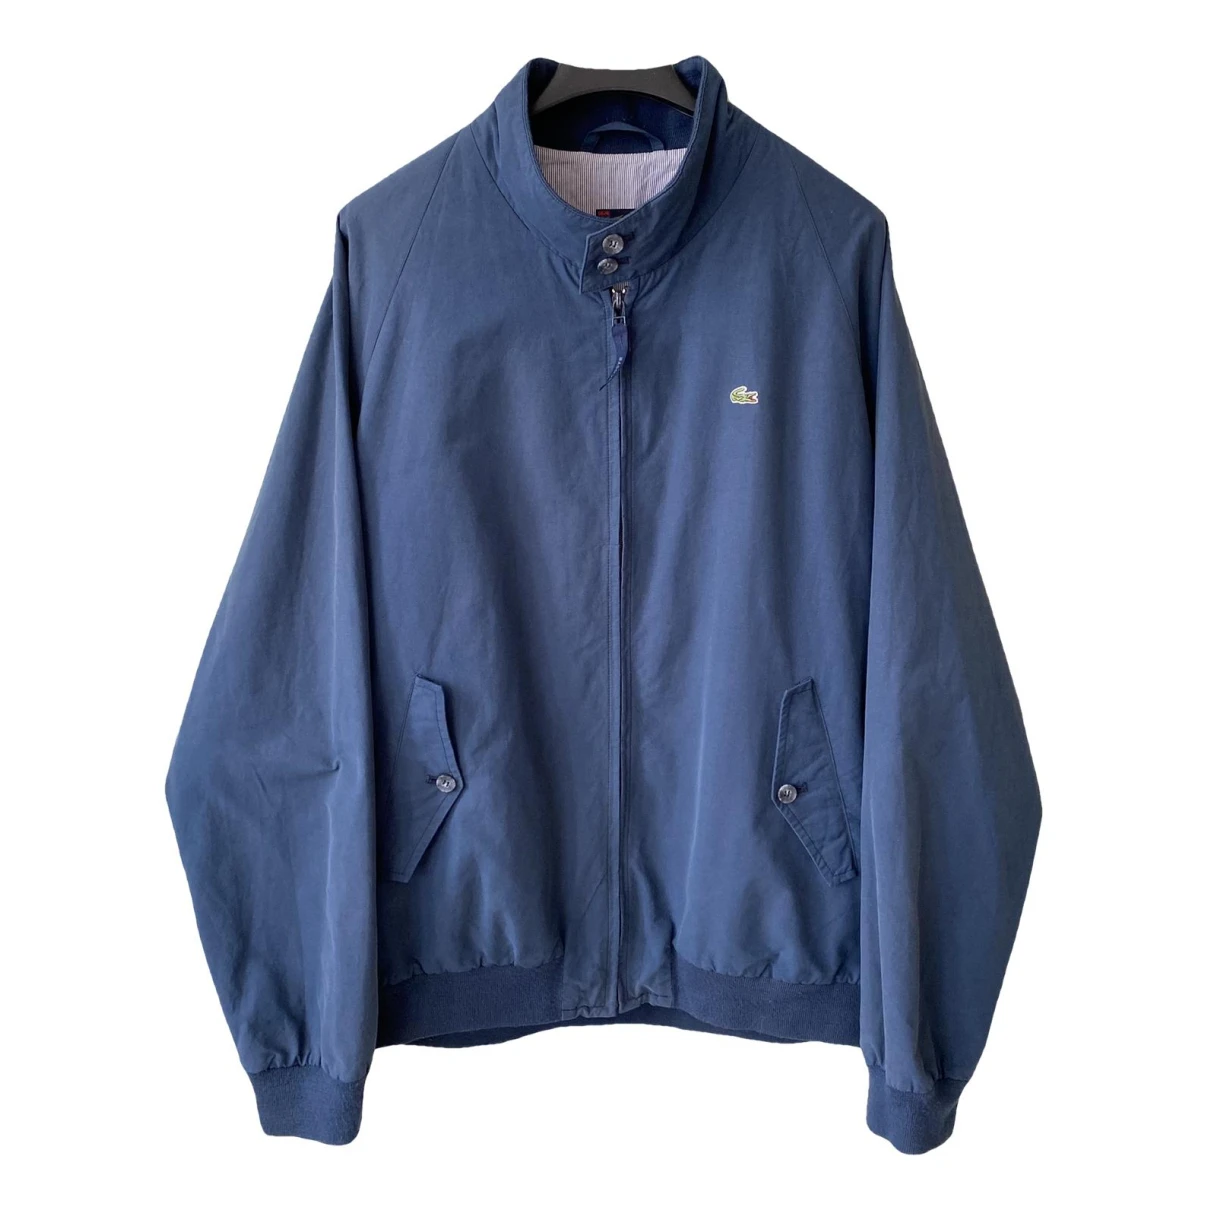 Pre-owned Lacoste Jacket In Navy